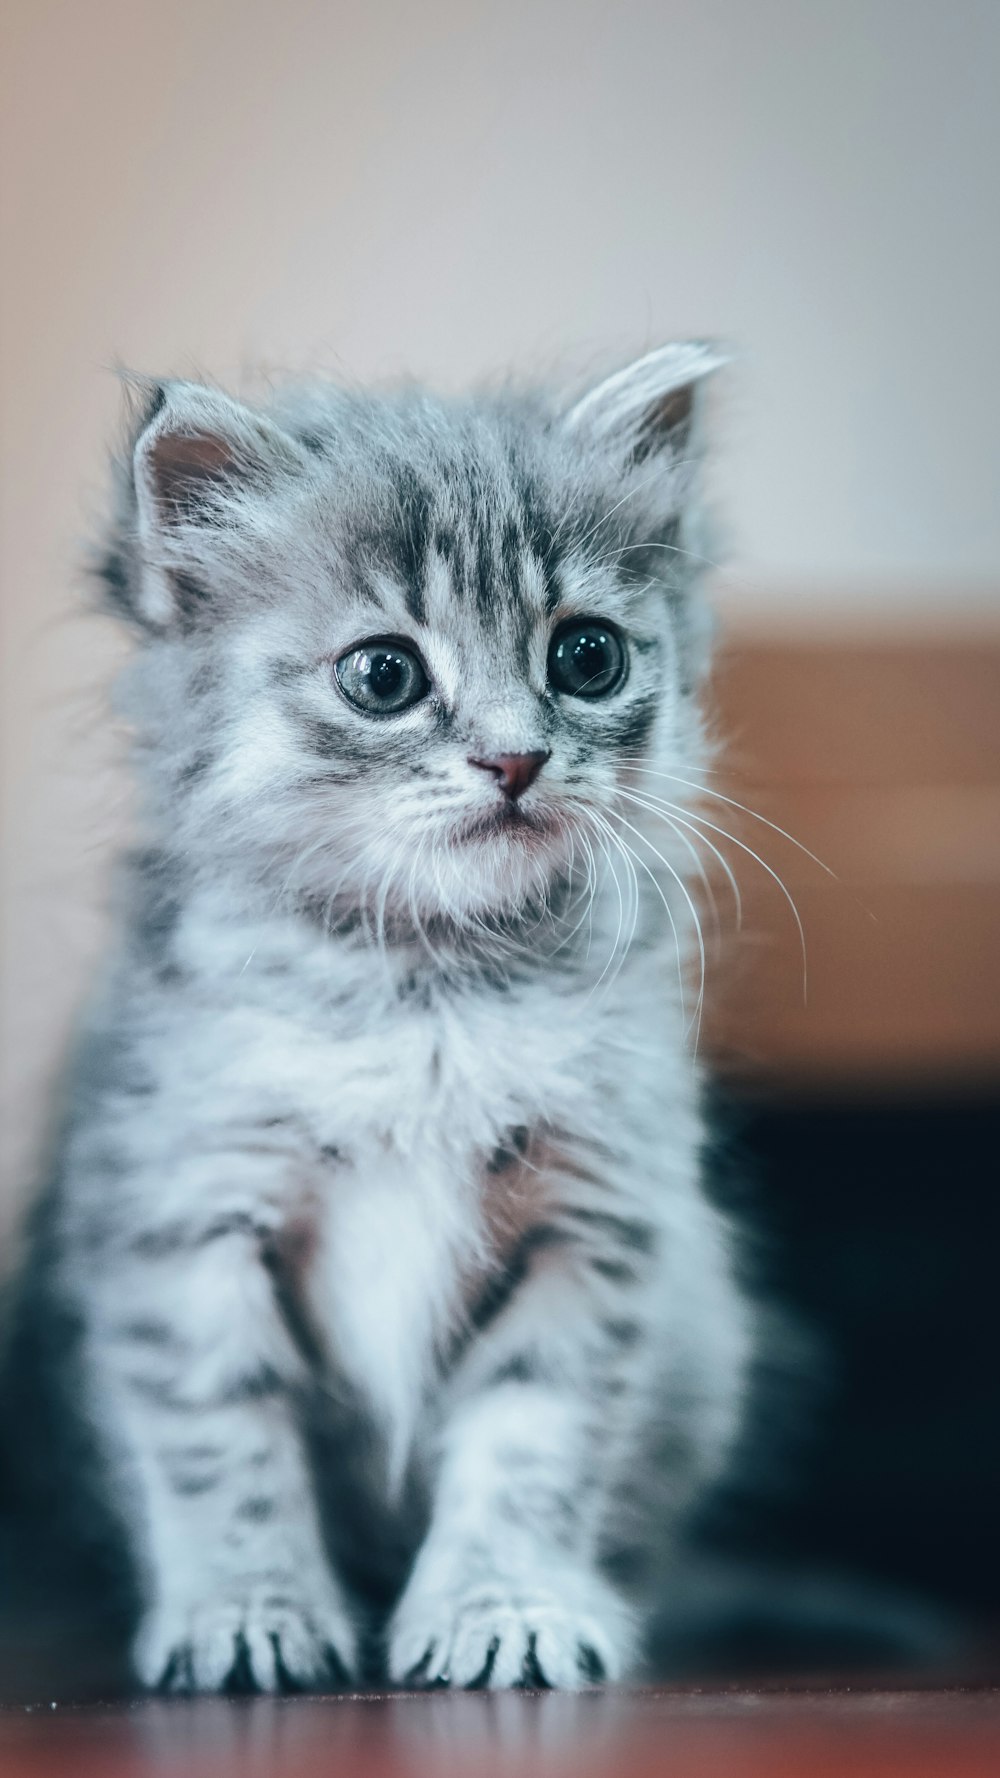 a kitten looking at the camera